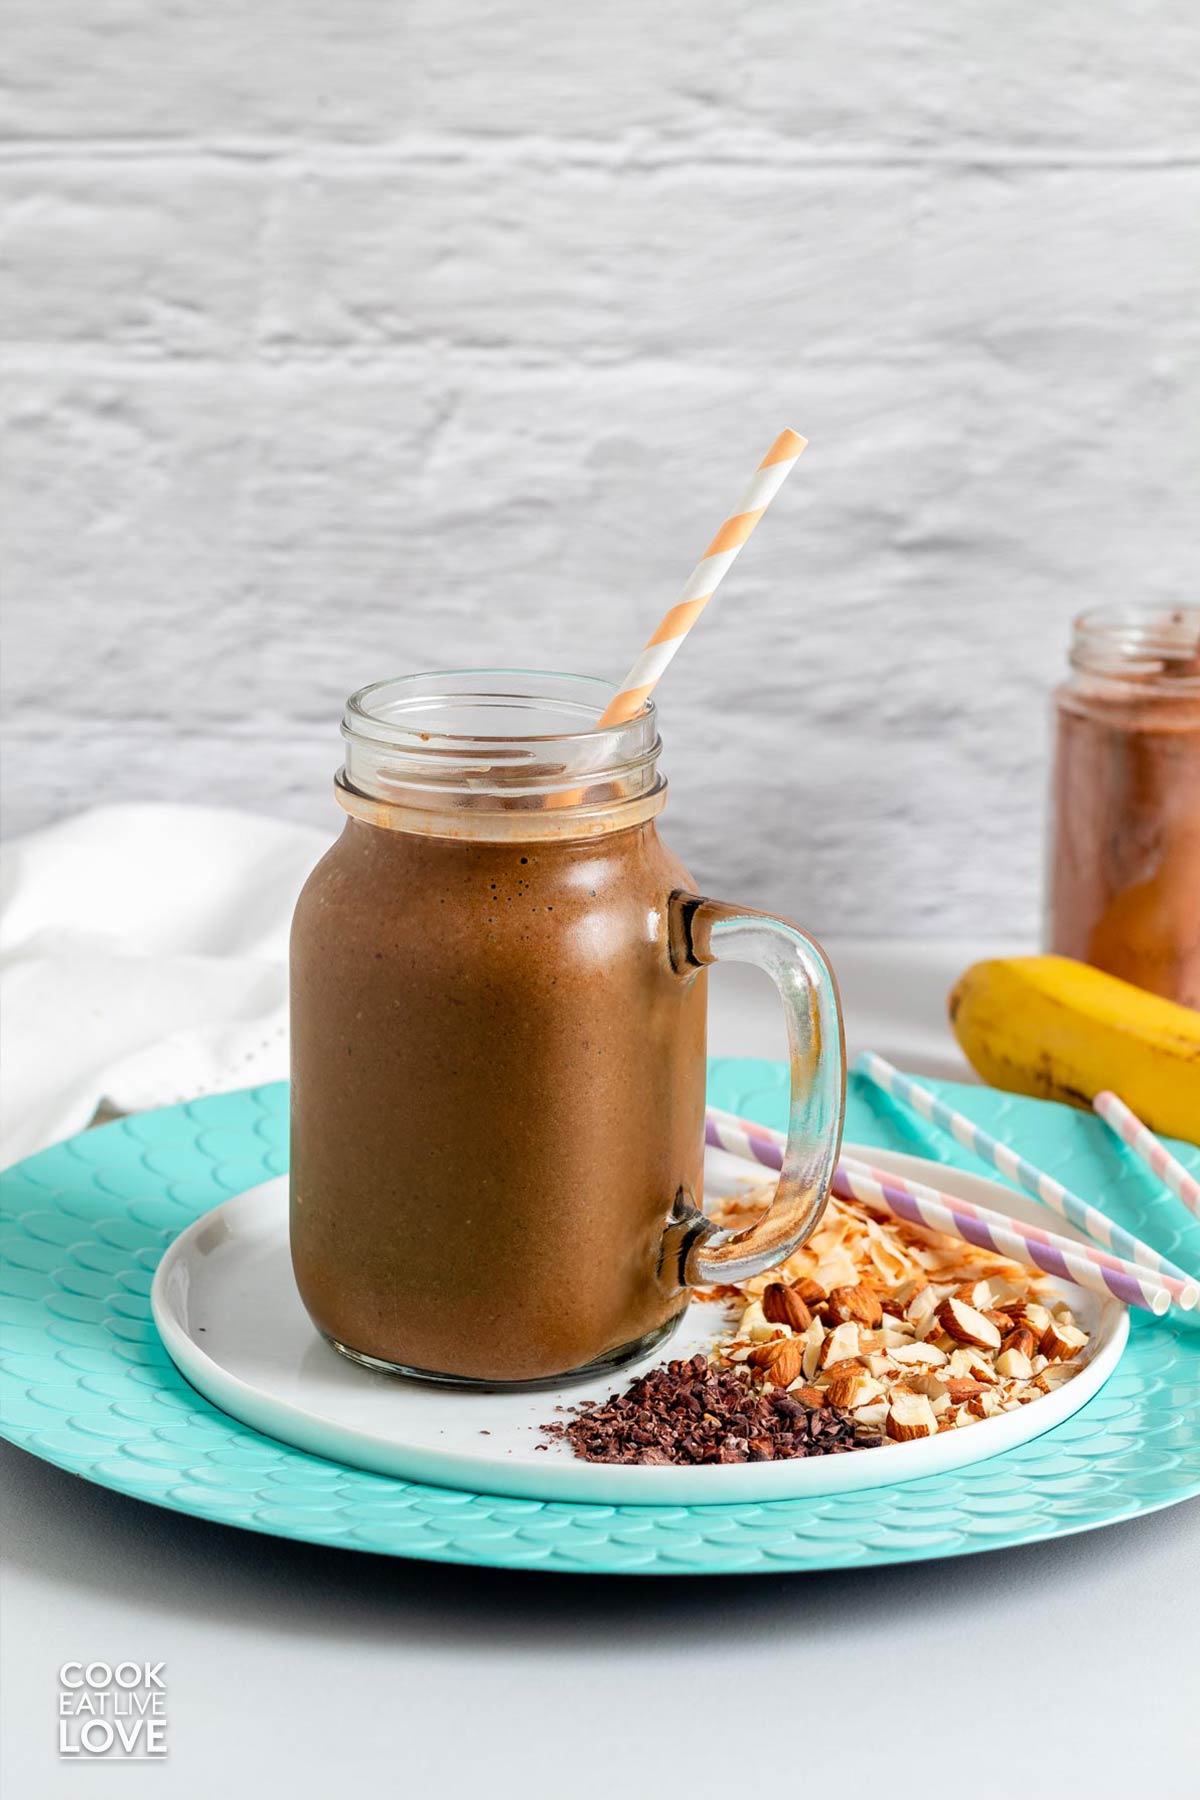 A chocolate smoothie in a large glass mug with a straw and toppings on a plate.